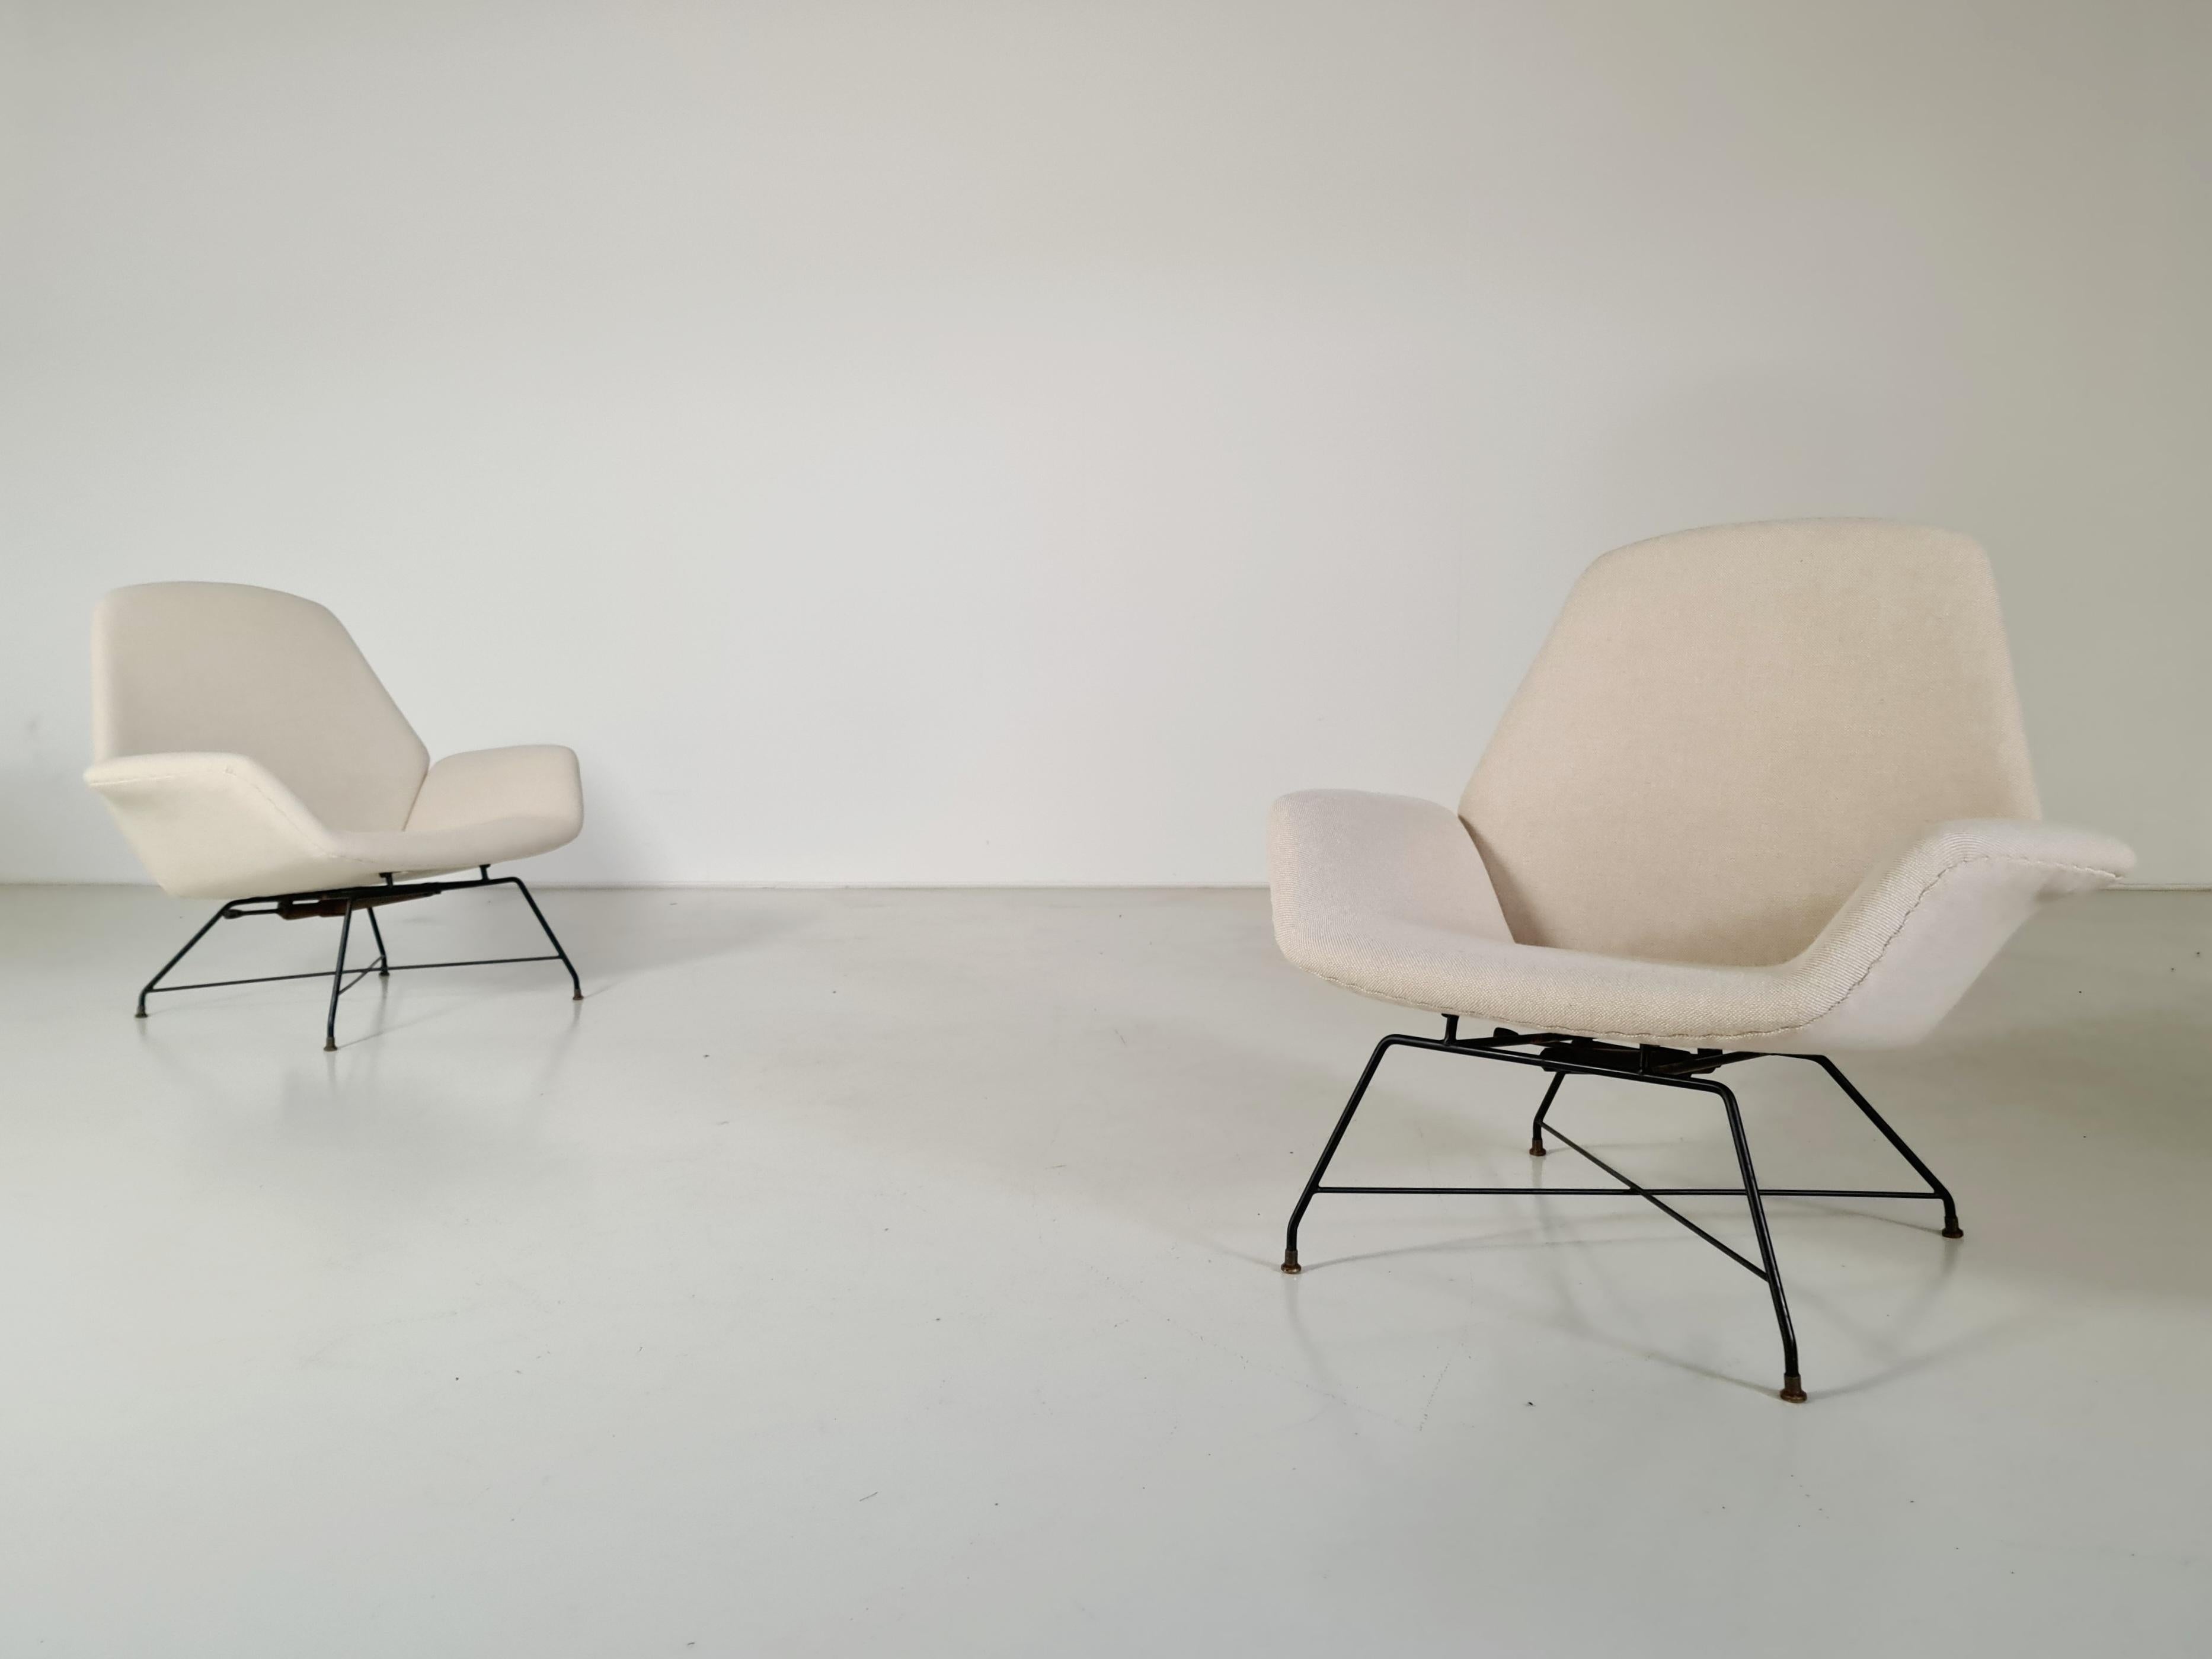 ‘Lotus’ Lounge Chairs in cream wool fabric by Augusto Bozzi for Saporiti, 1960s For Sale 1